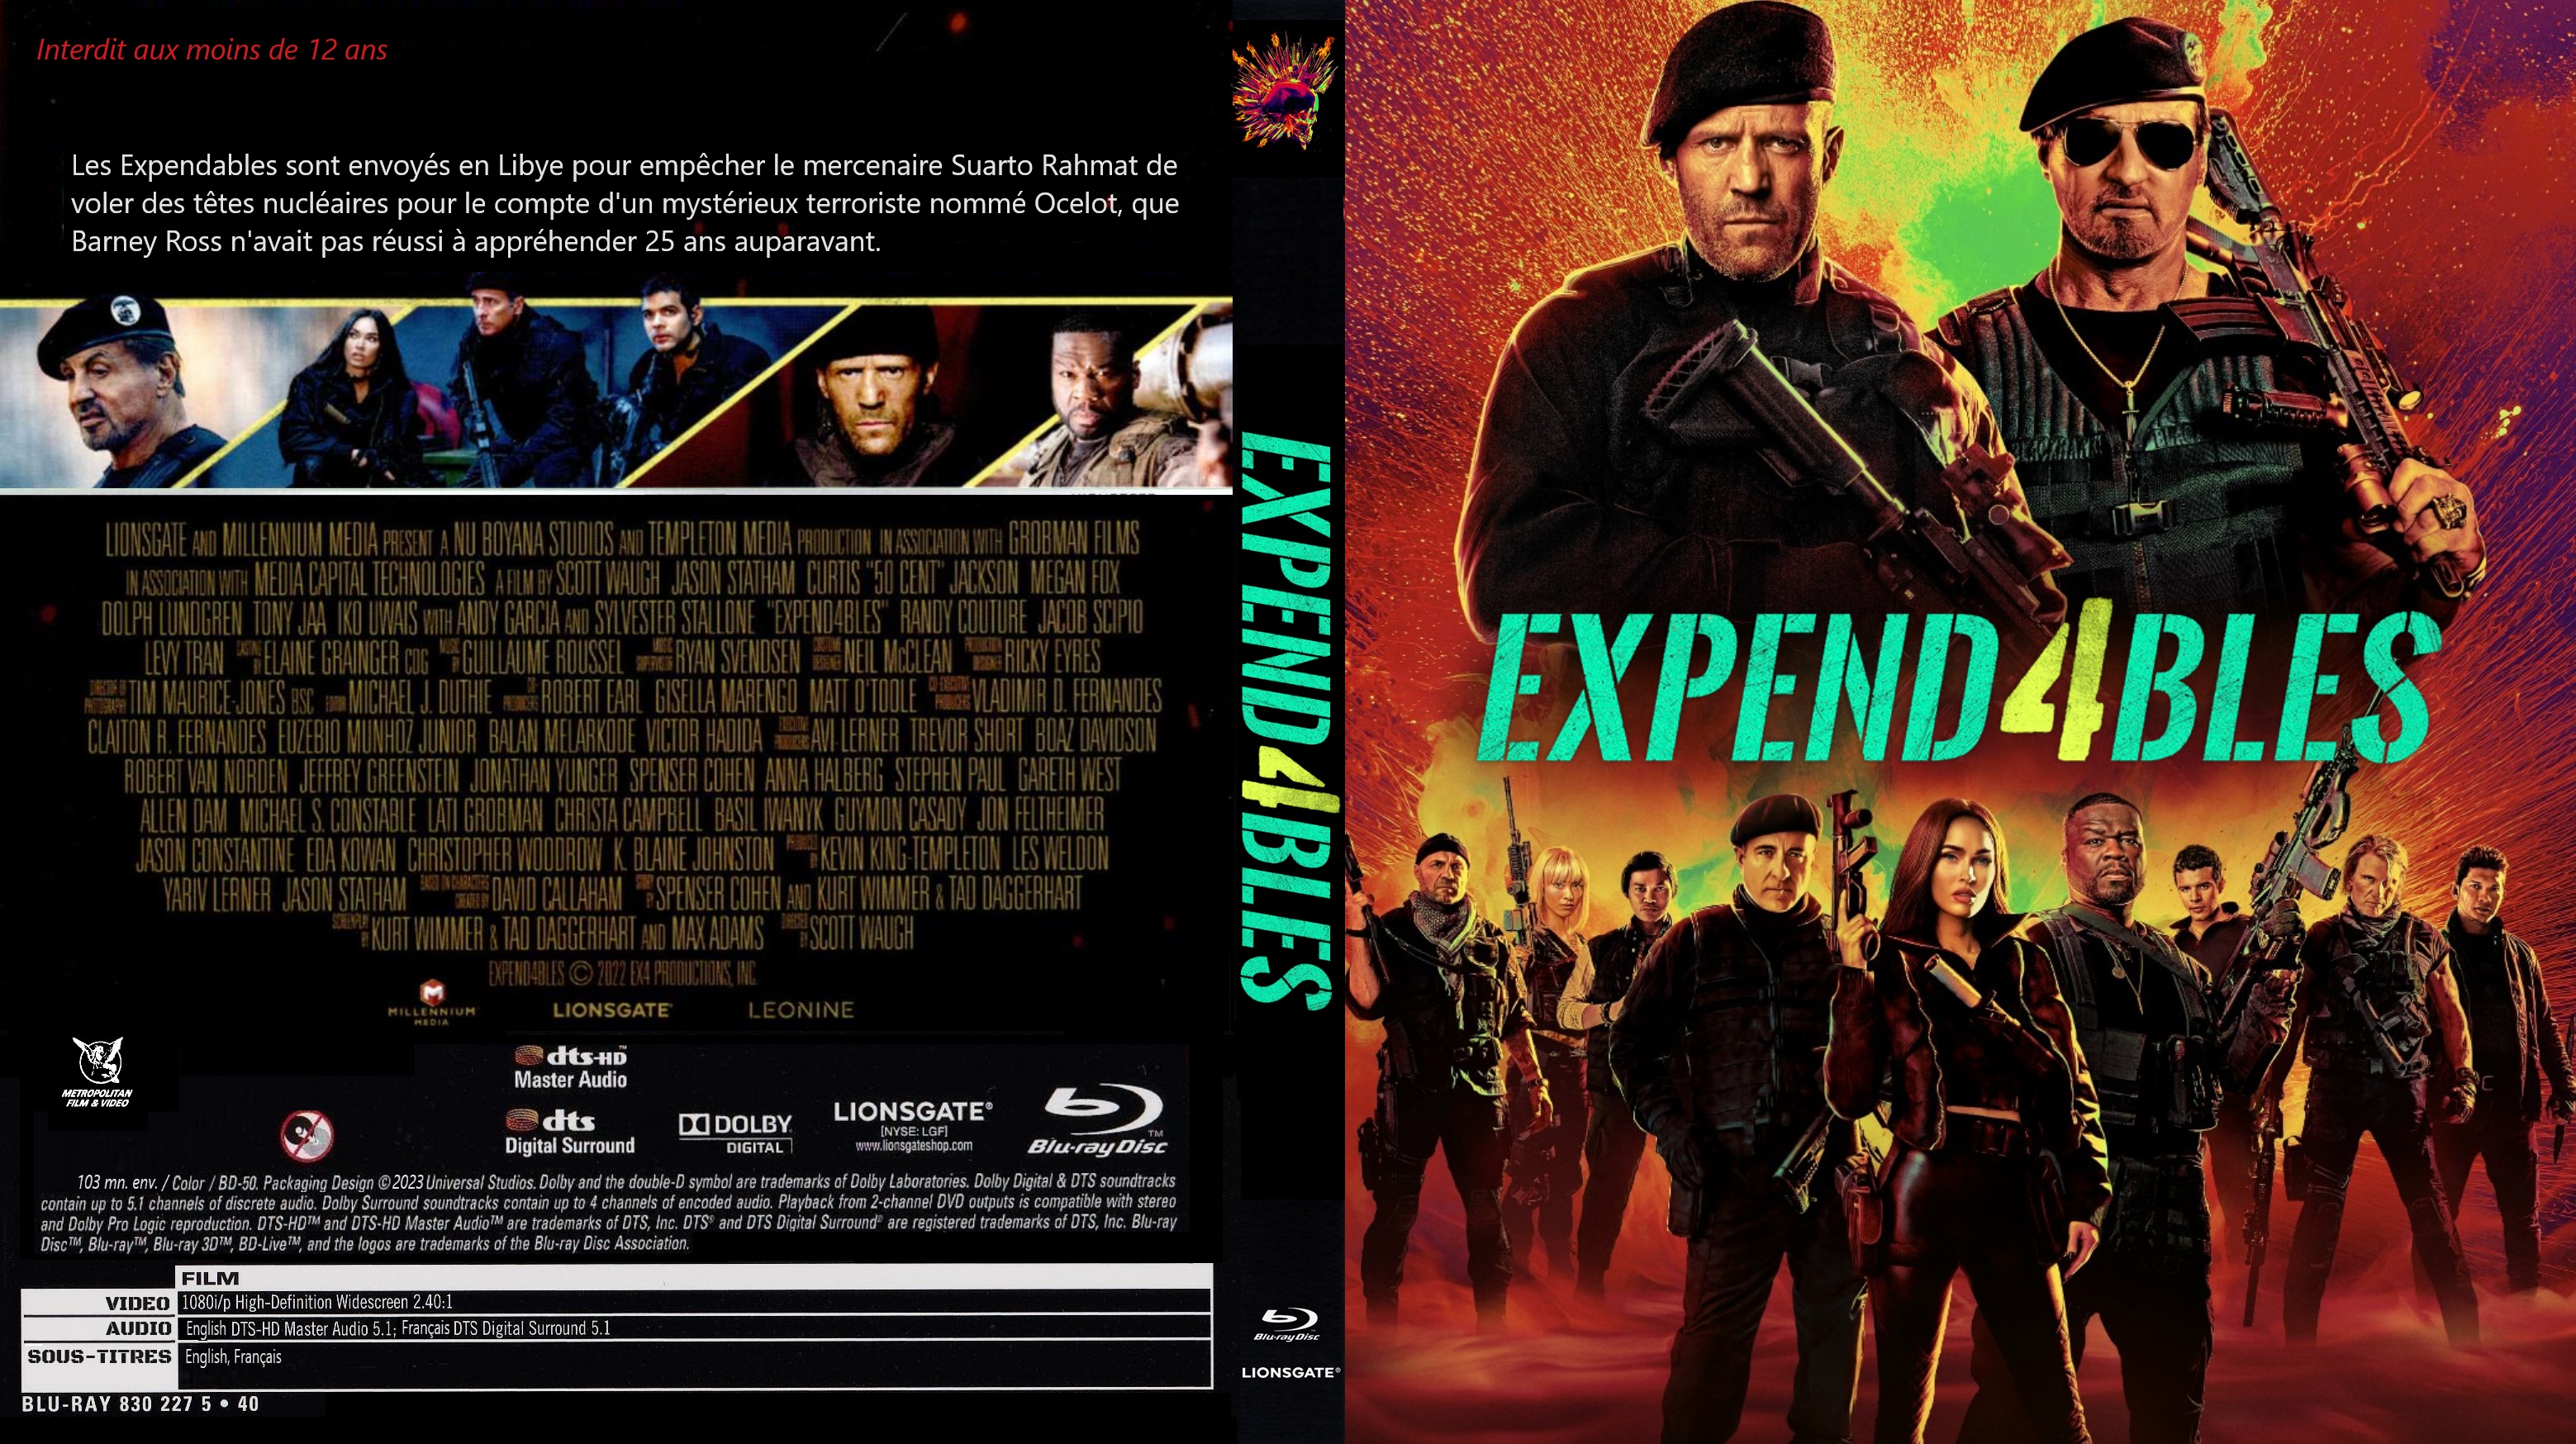 Jaquette DVD Expendables 4 custom (BLU-RAY)